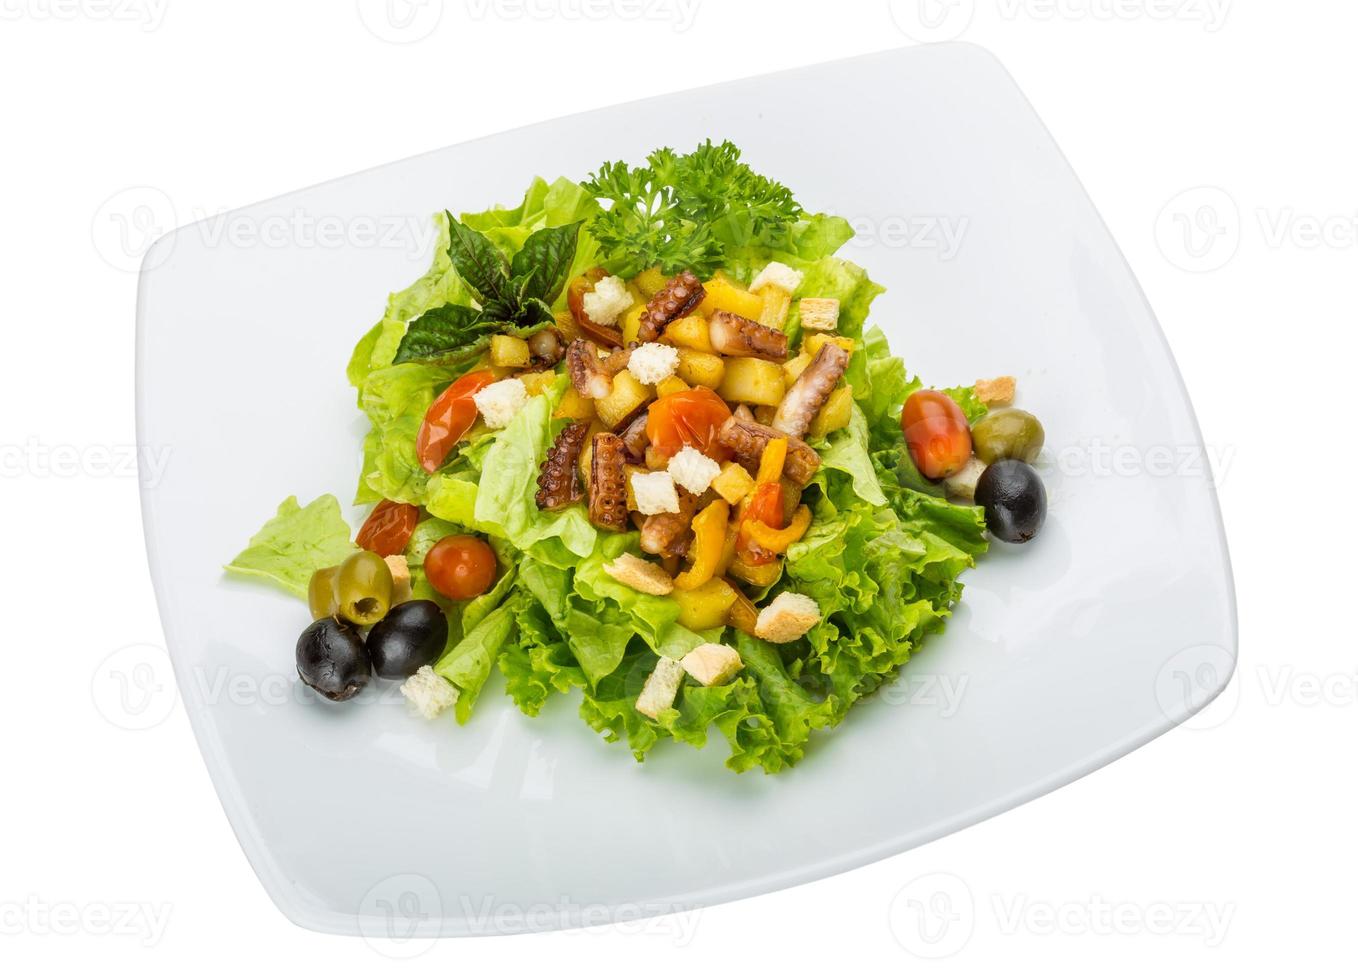 Octopus salad on the plate and white background photo